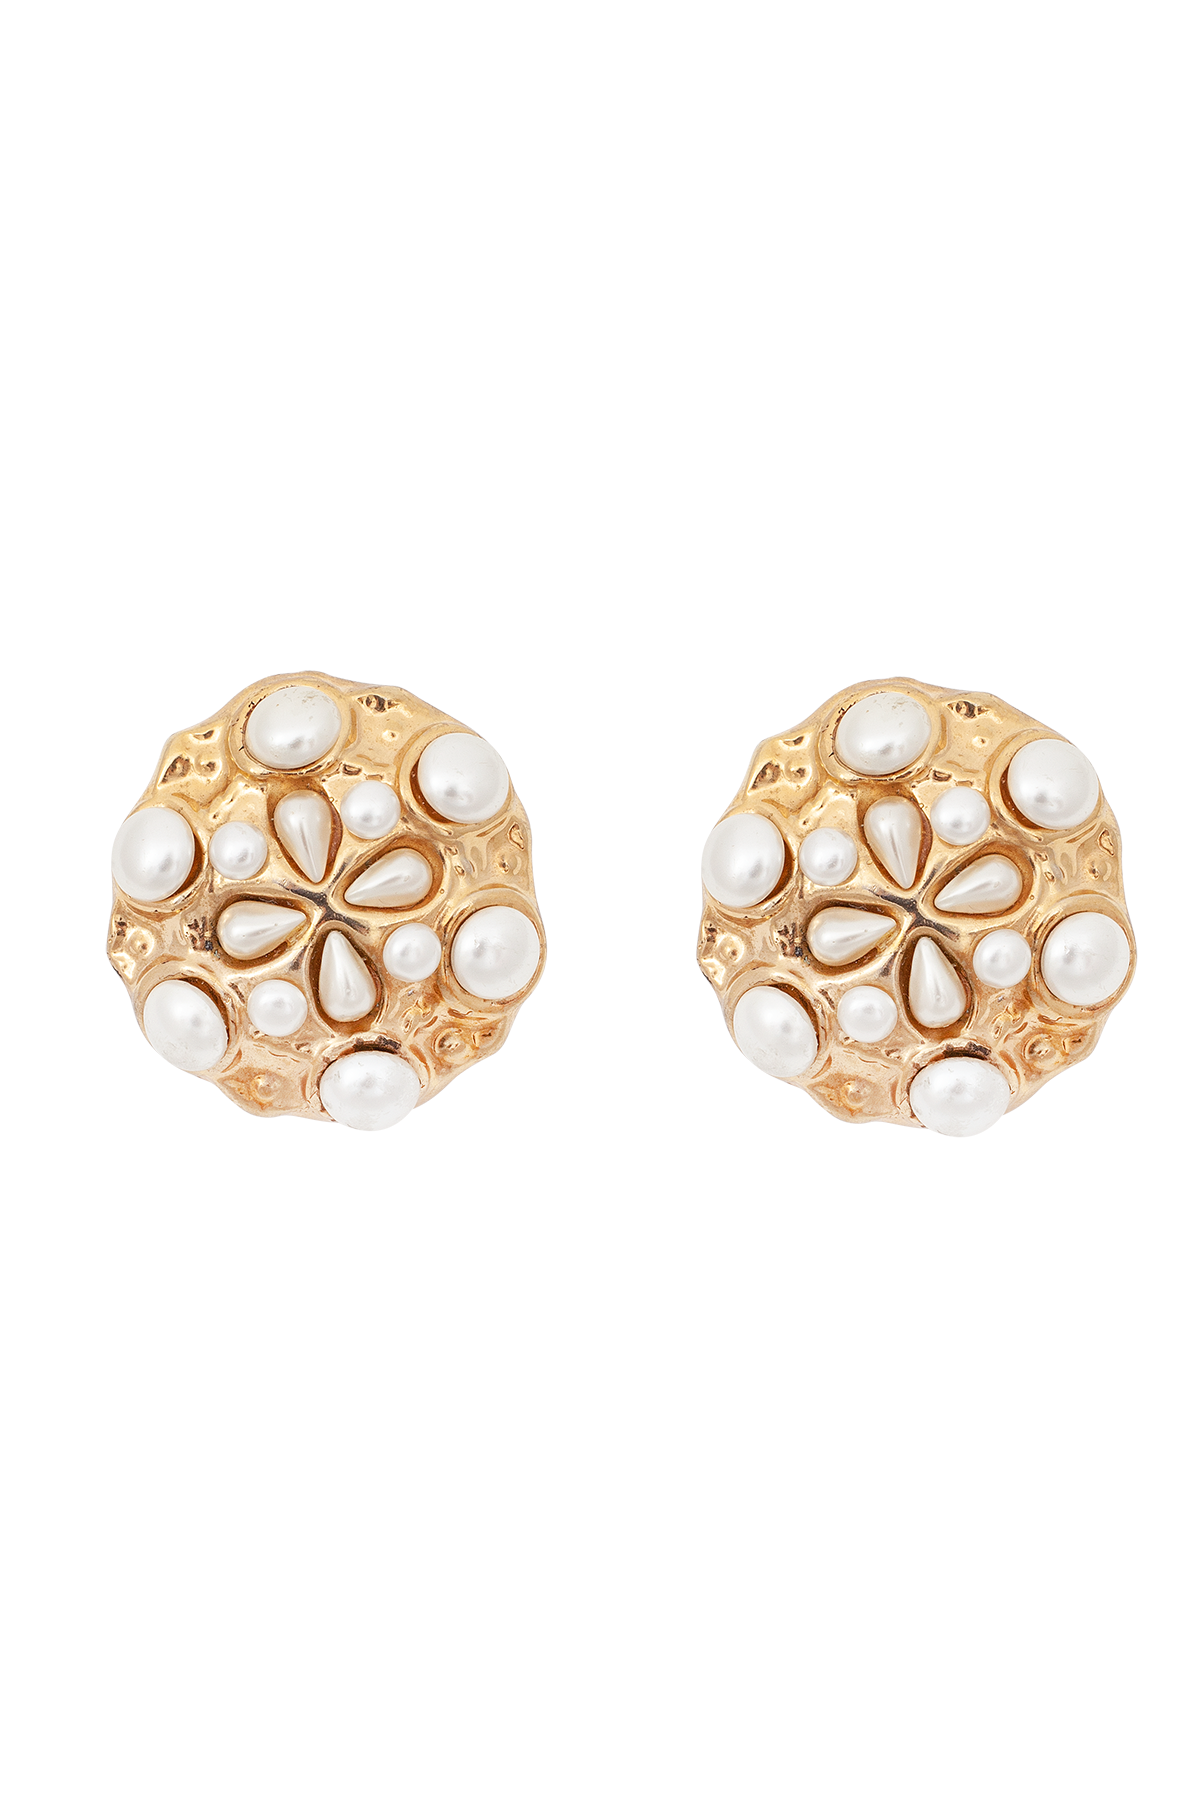 60s Resin Earrings embellished with pearls